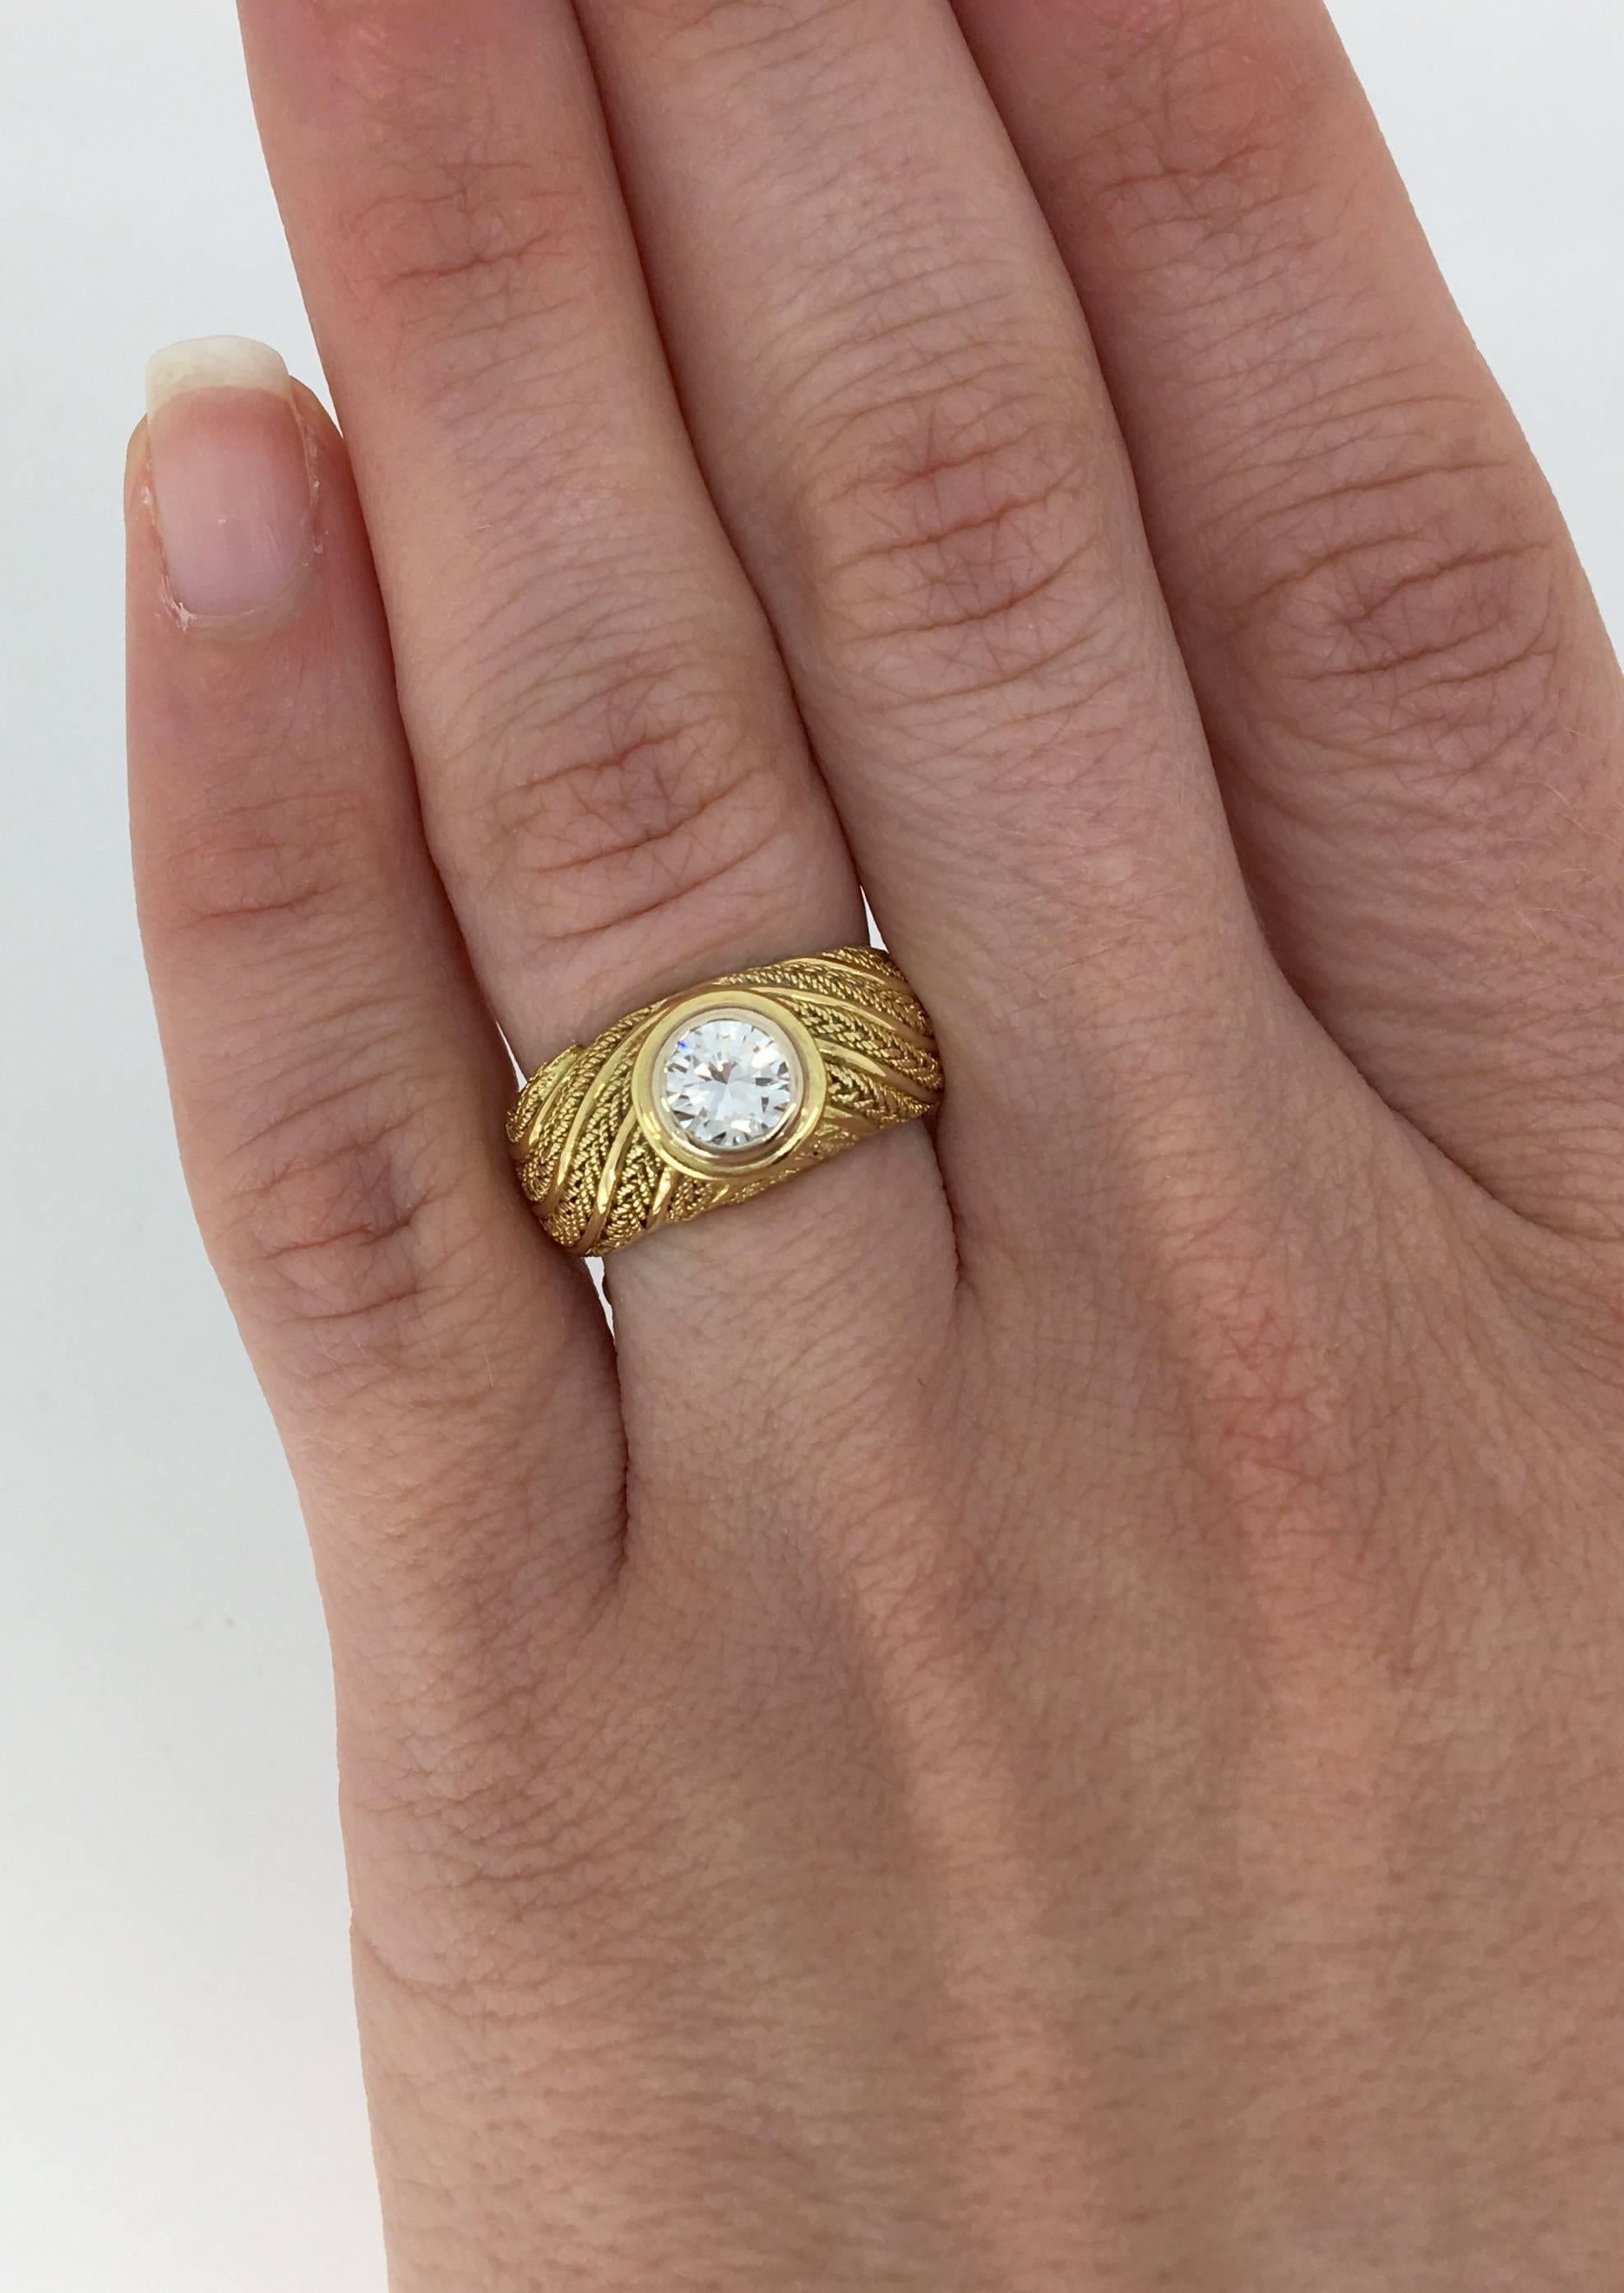 This custom ring features a .78CT Round Brilliant Cut Diamond bezel set in 18k yellow gold. The diamond has I-J color and SI1 clarity. The 18K yellow gold ring was created with a distinctly unique rope-like design. It is currently a size 6.0 and